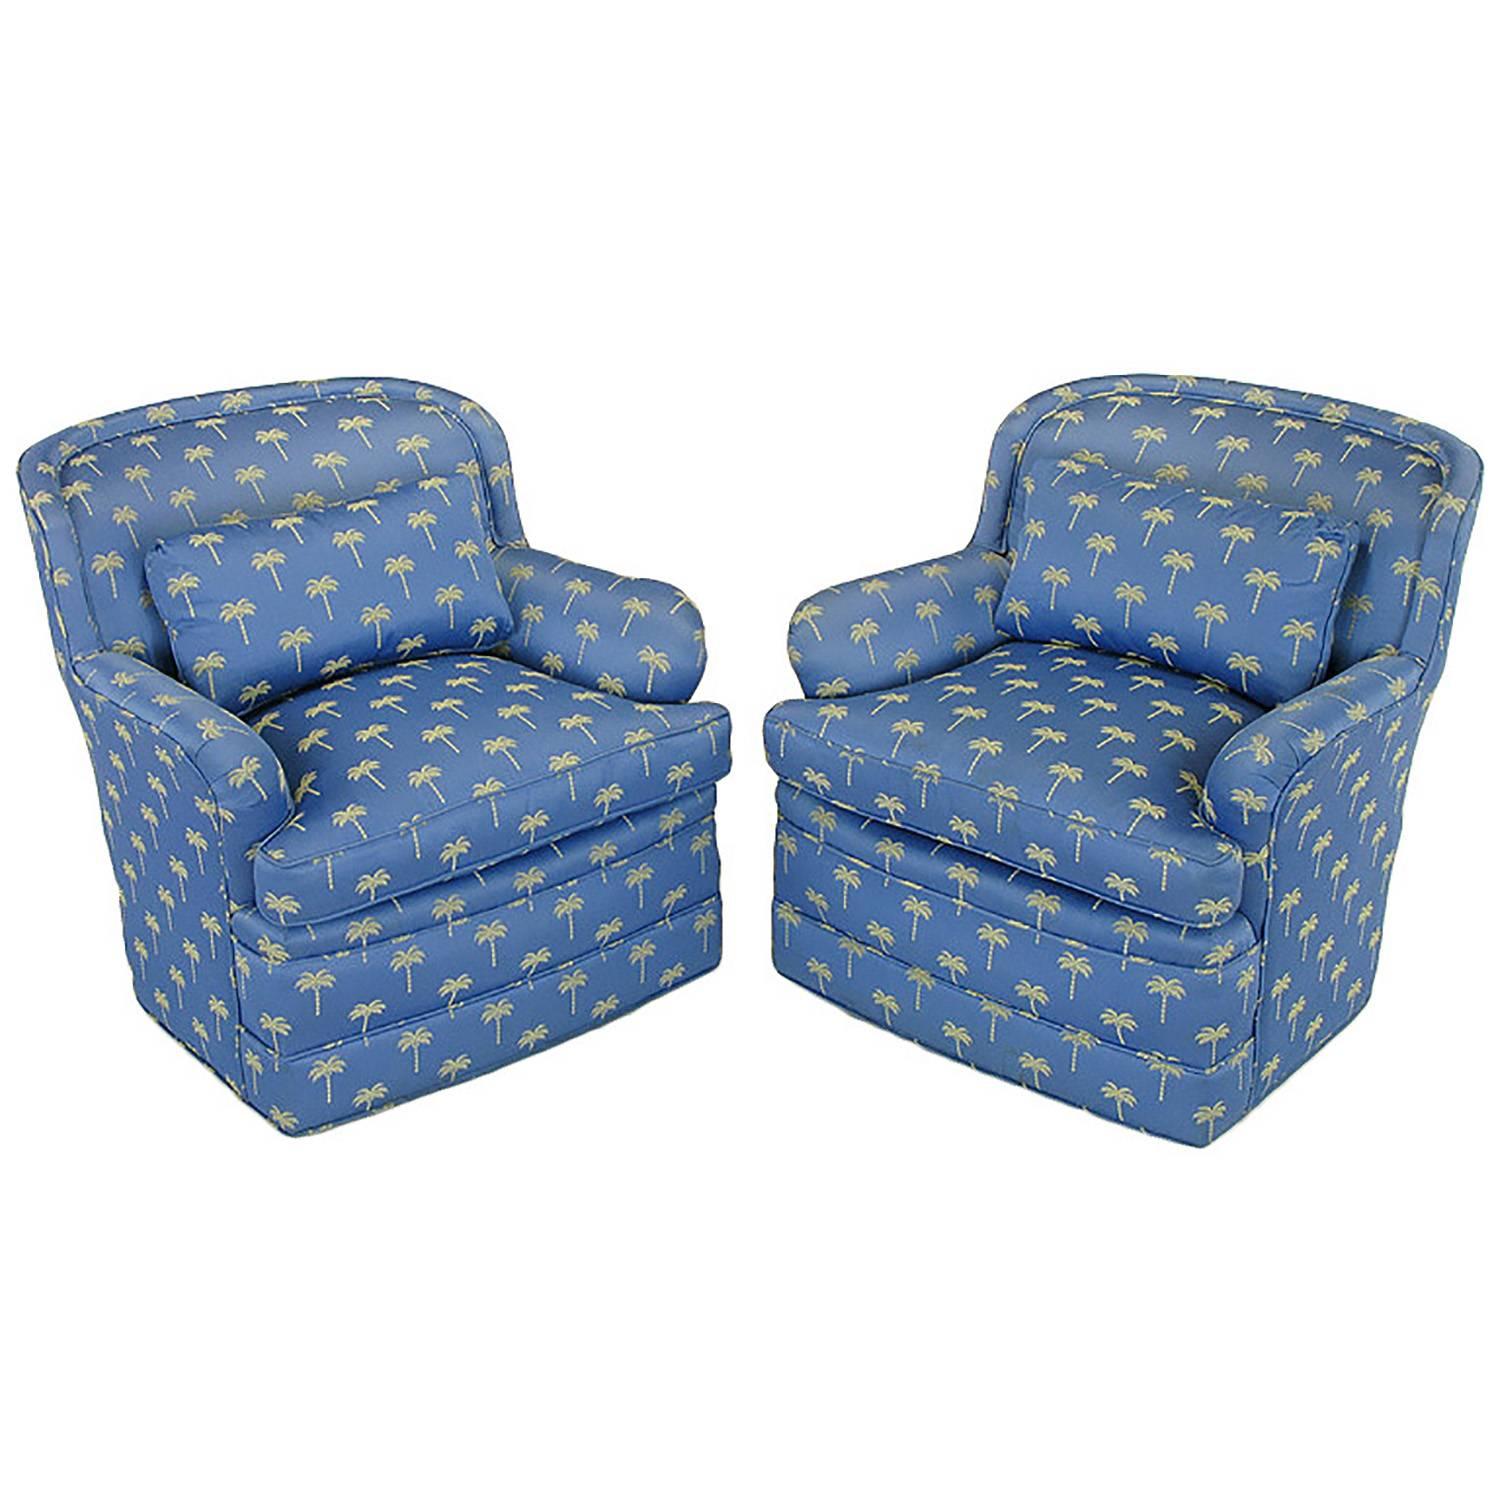 Pair of 1940s Cerulean Blue Swivel Lounge Chairs 2